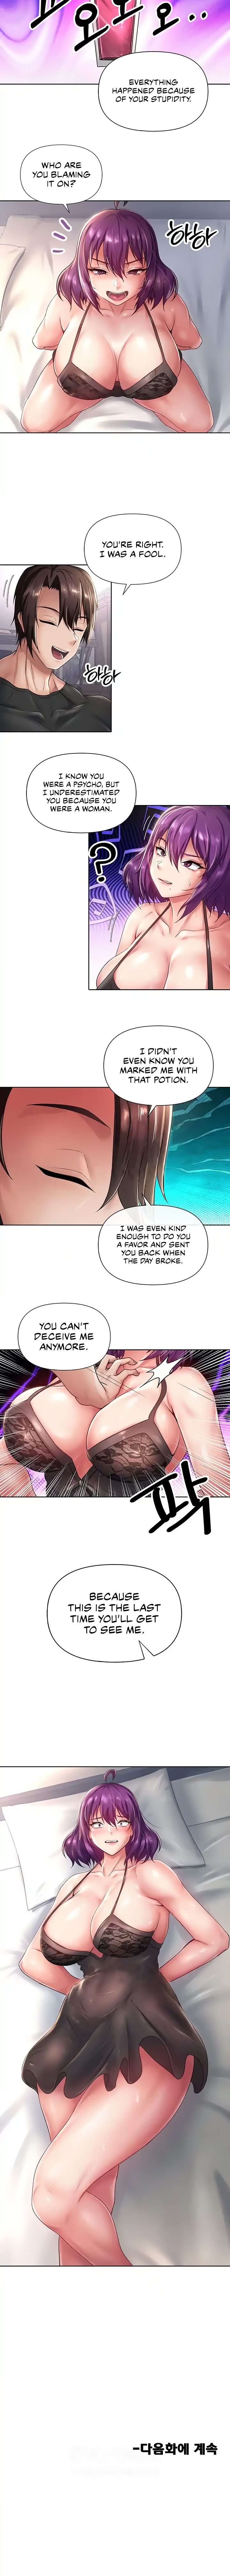 Welcome to the Isekai Convenience Store - Chapter 20 Page 7